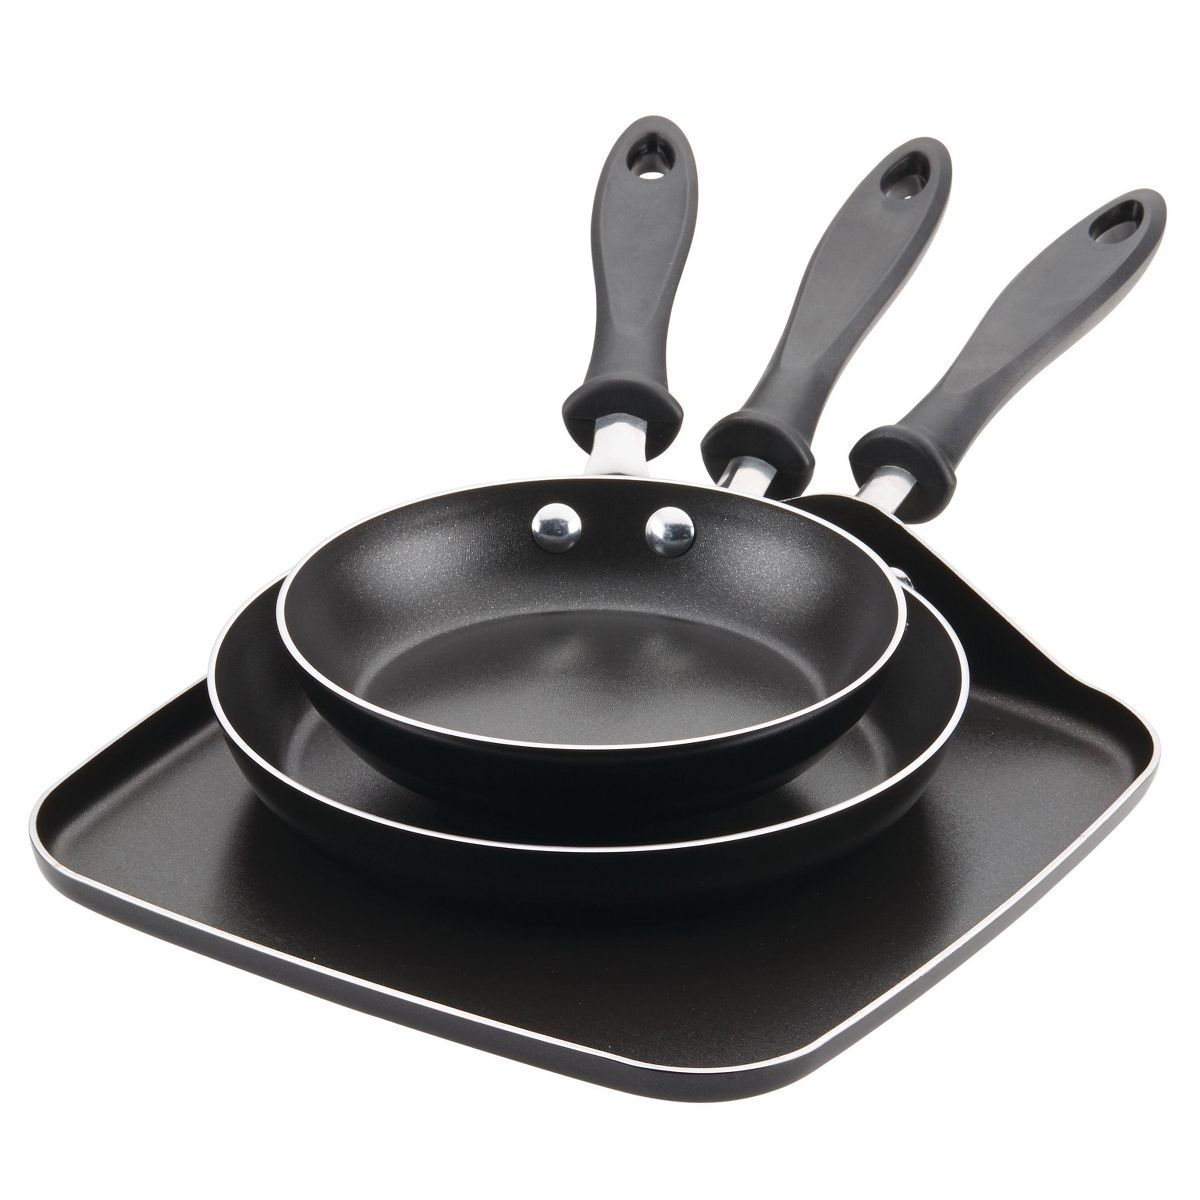 Farberware 3pc Nonstick Aluminum Reliance Skillet and Griddle Cookware Set Black | Target